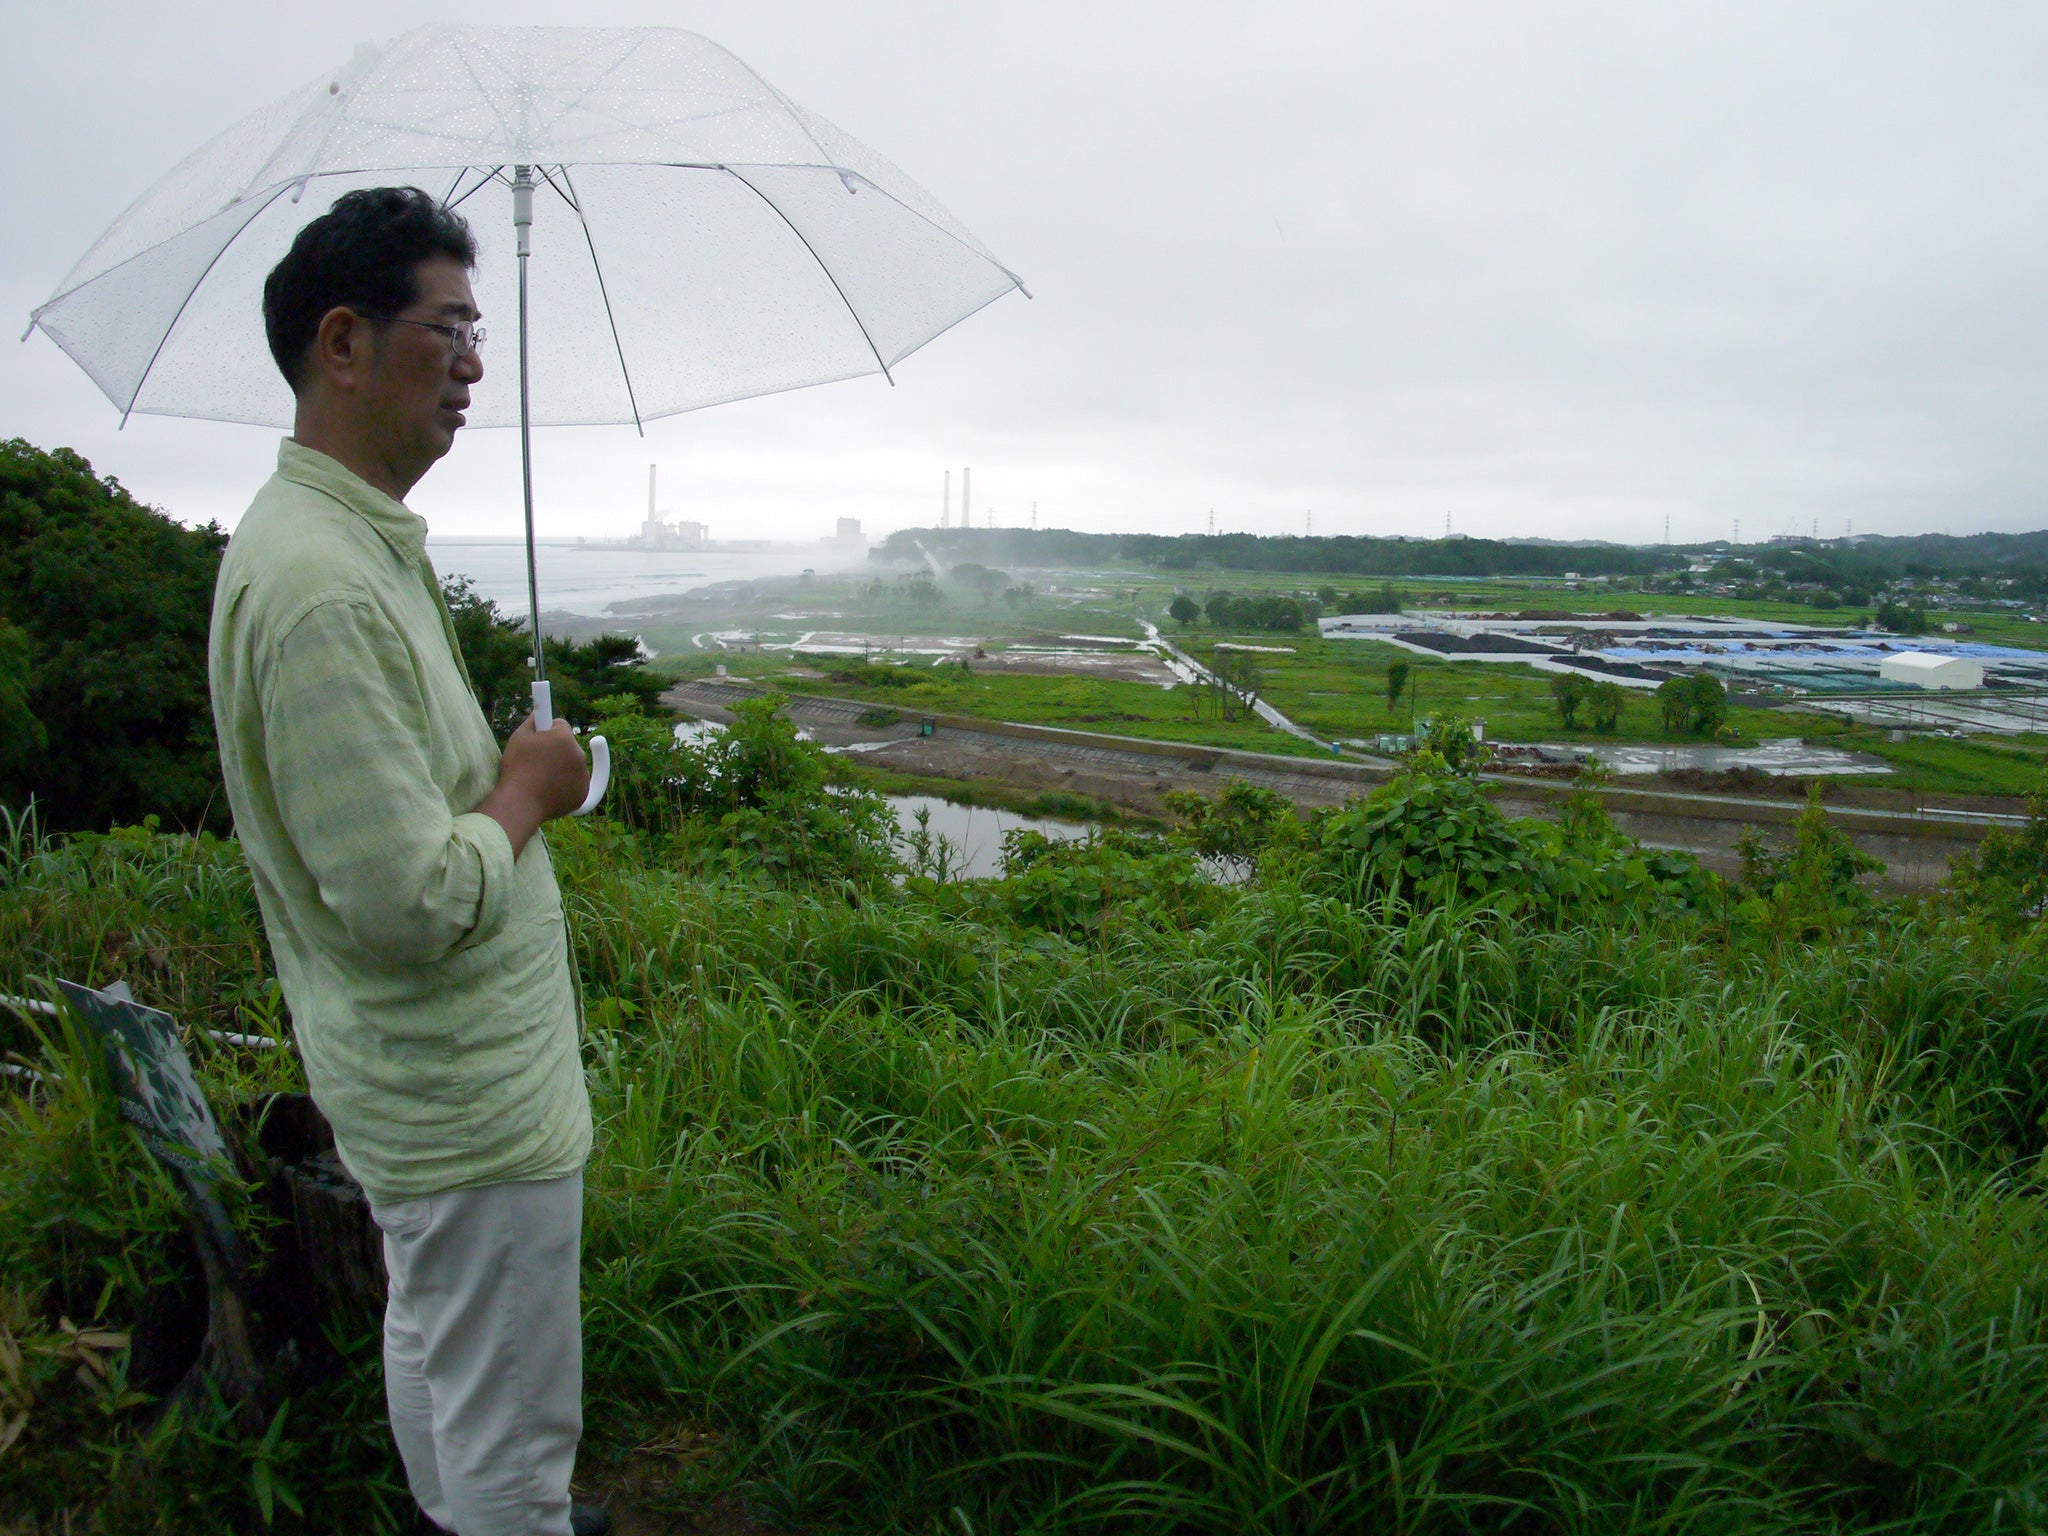 Satoru Yamauchi looking at the collection site of contaminated earth from a beachside park, in his hometown of Naraha, a tiny town in Fukushima prefecture